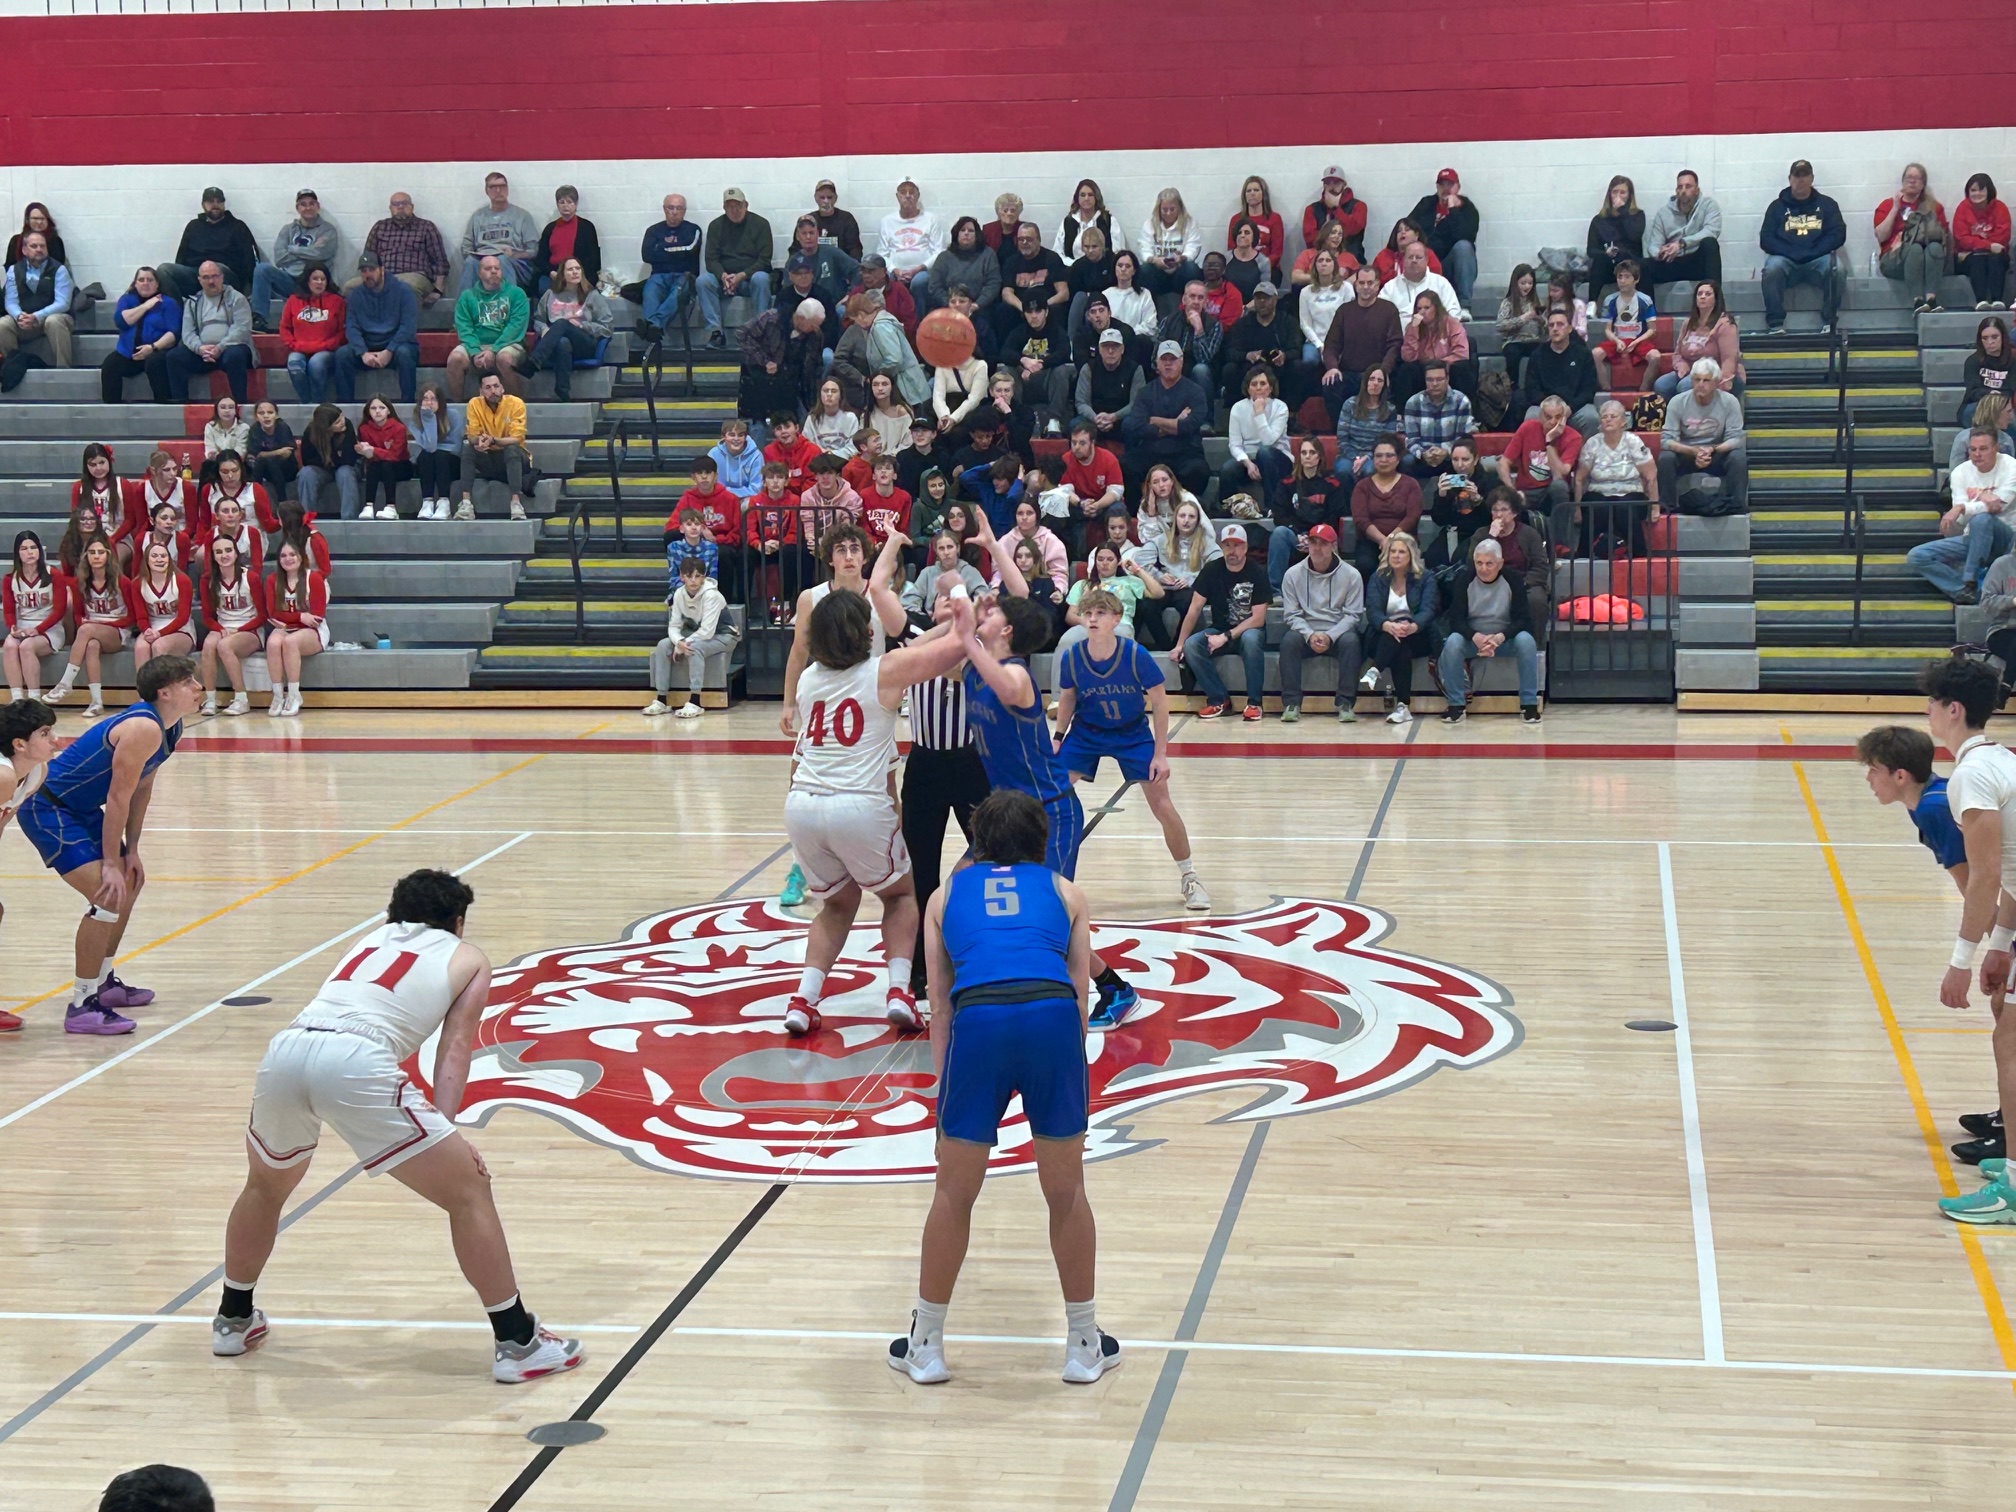 Fleetwood Hustles Past Garden Spot As Tigers’ Playoff Resume Only Improves Following Decisive 20-Point Victory Over 5A Nonconference Opponent